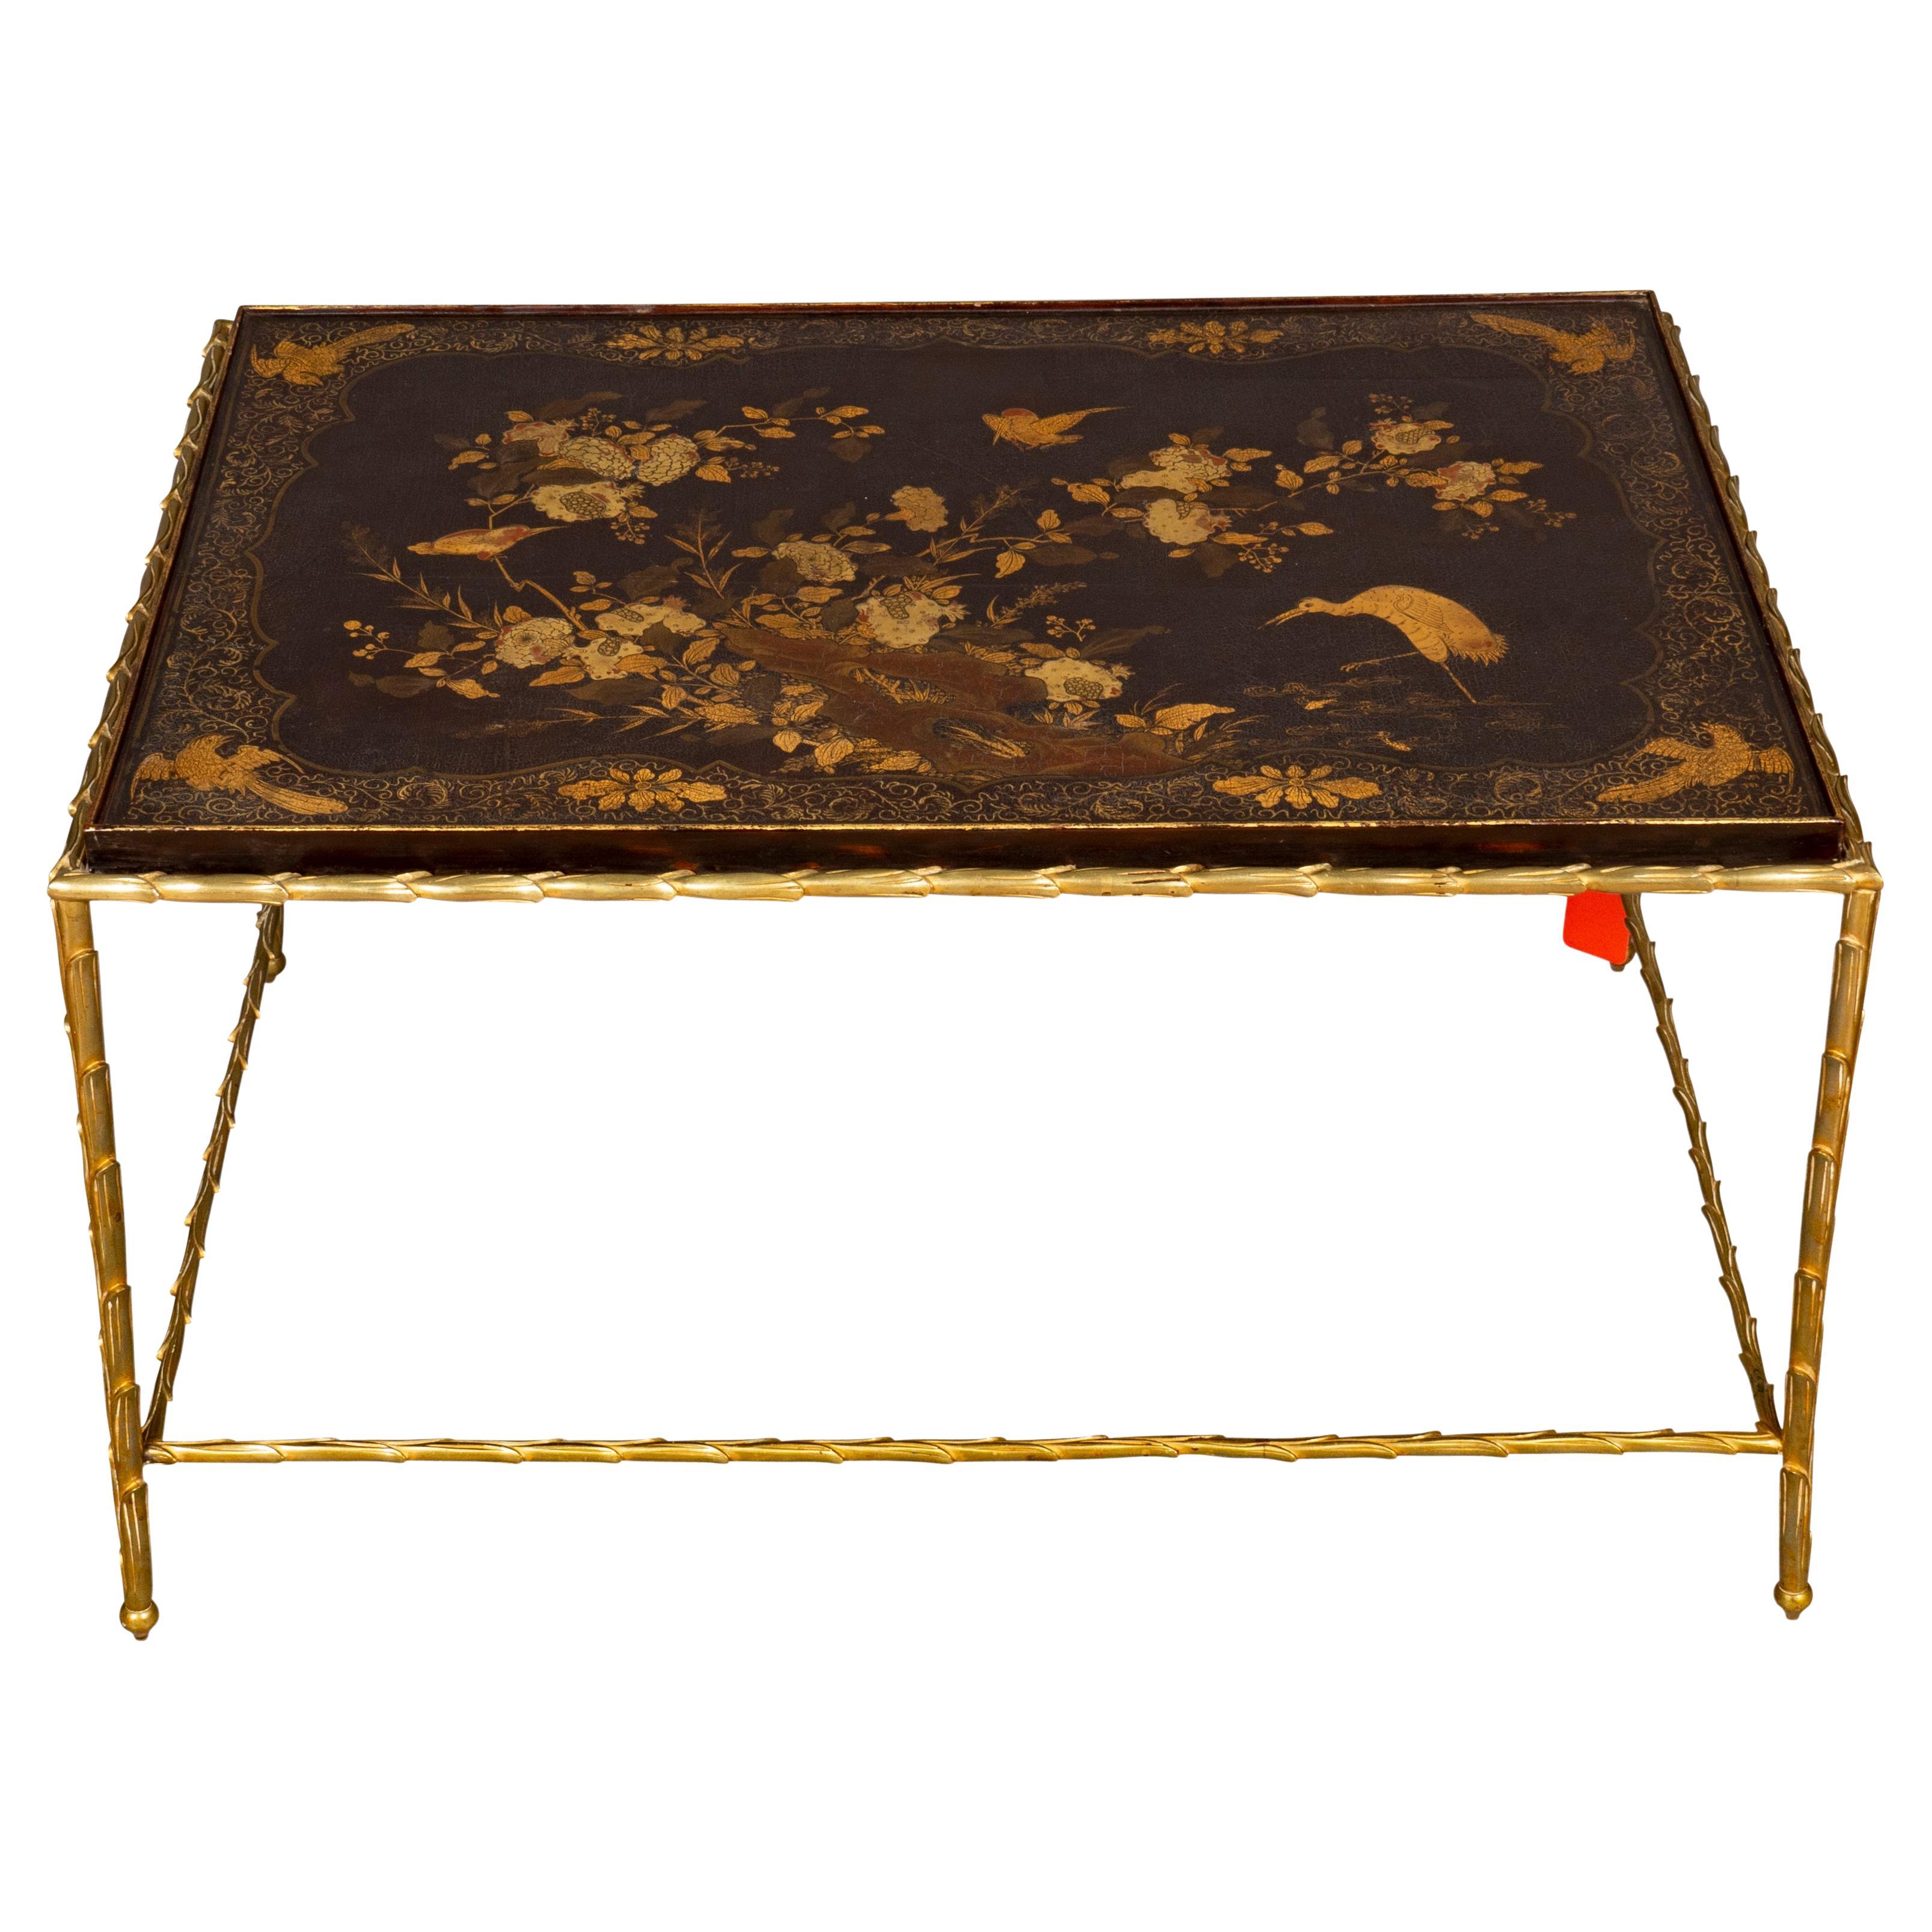 Rectangular with a brown ground and gilded surface with Asian inspired decoration with floral rockwork and bird, brass surround of the top continuing to the legs and stretcher.